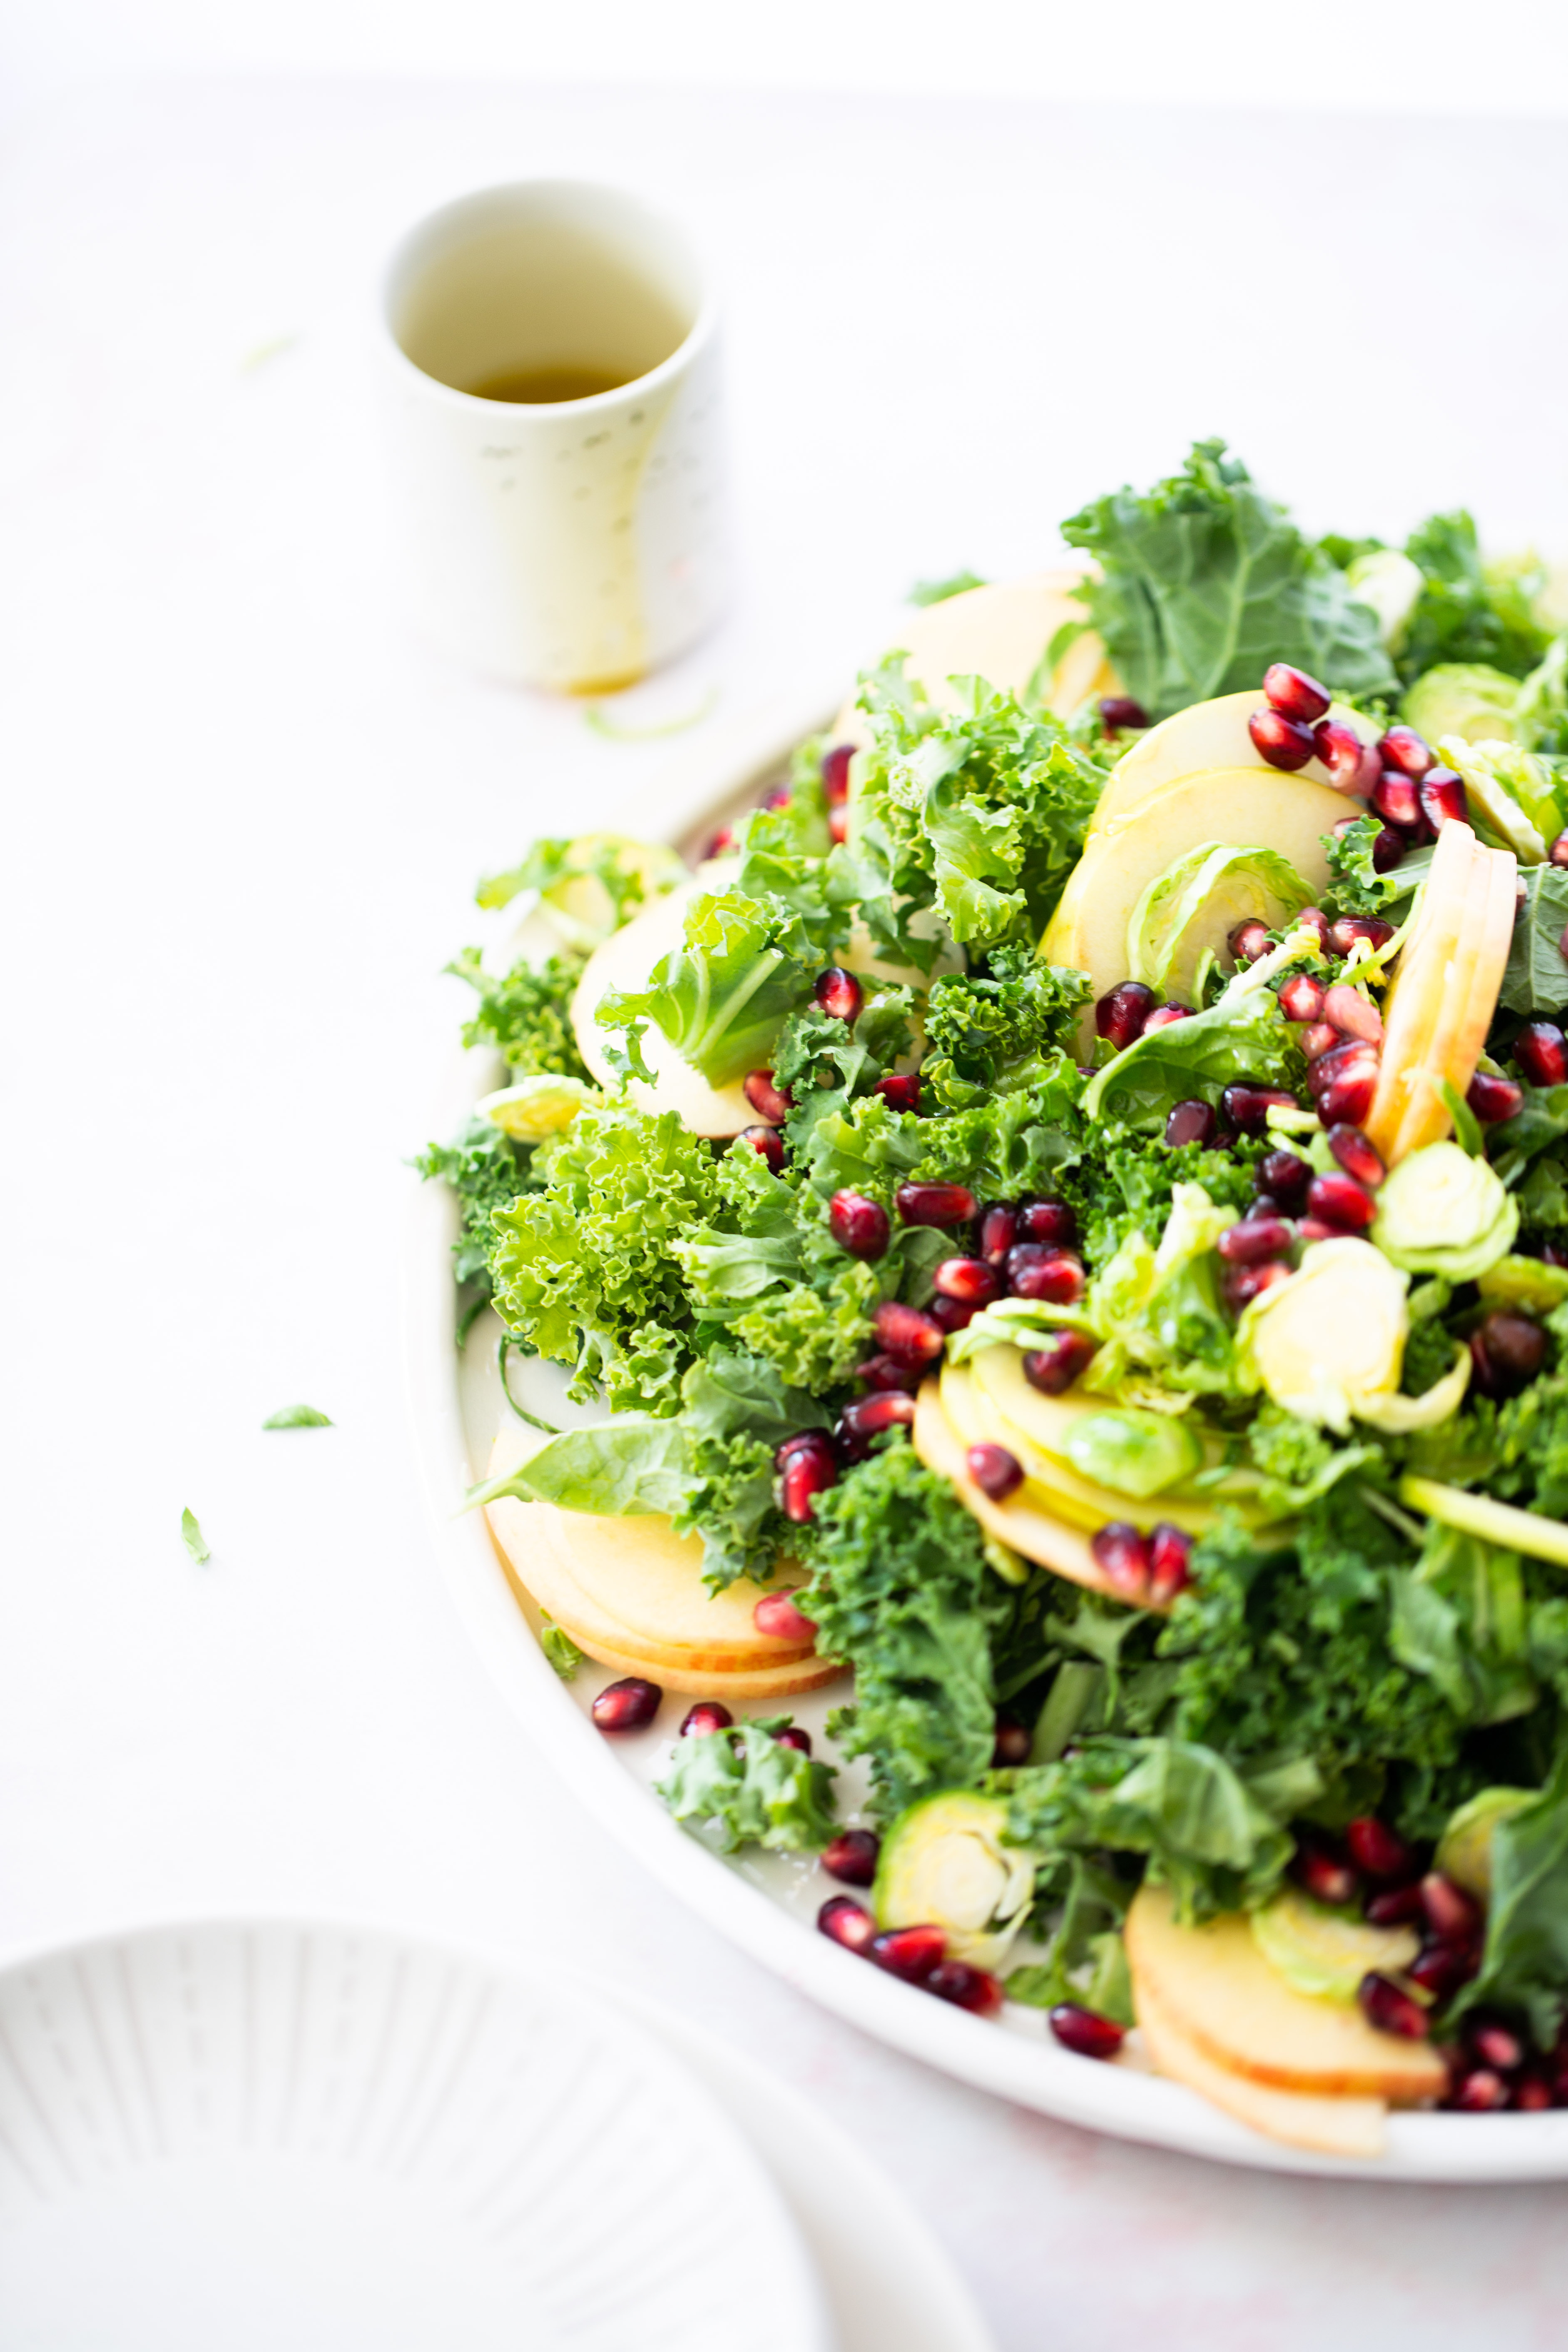 A plate of kale salad with apples and pomegranate, perfect for a healthy meal.